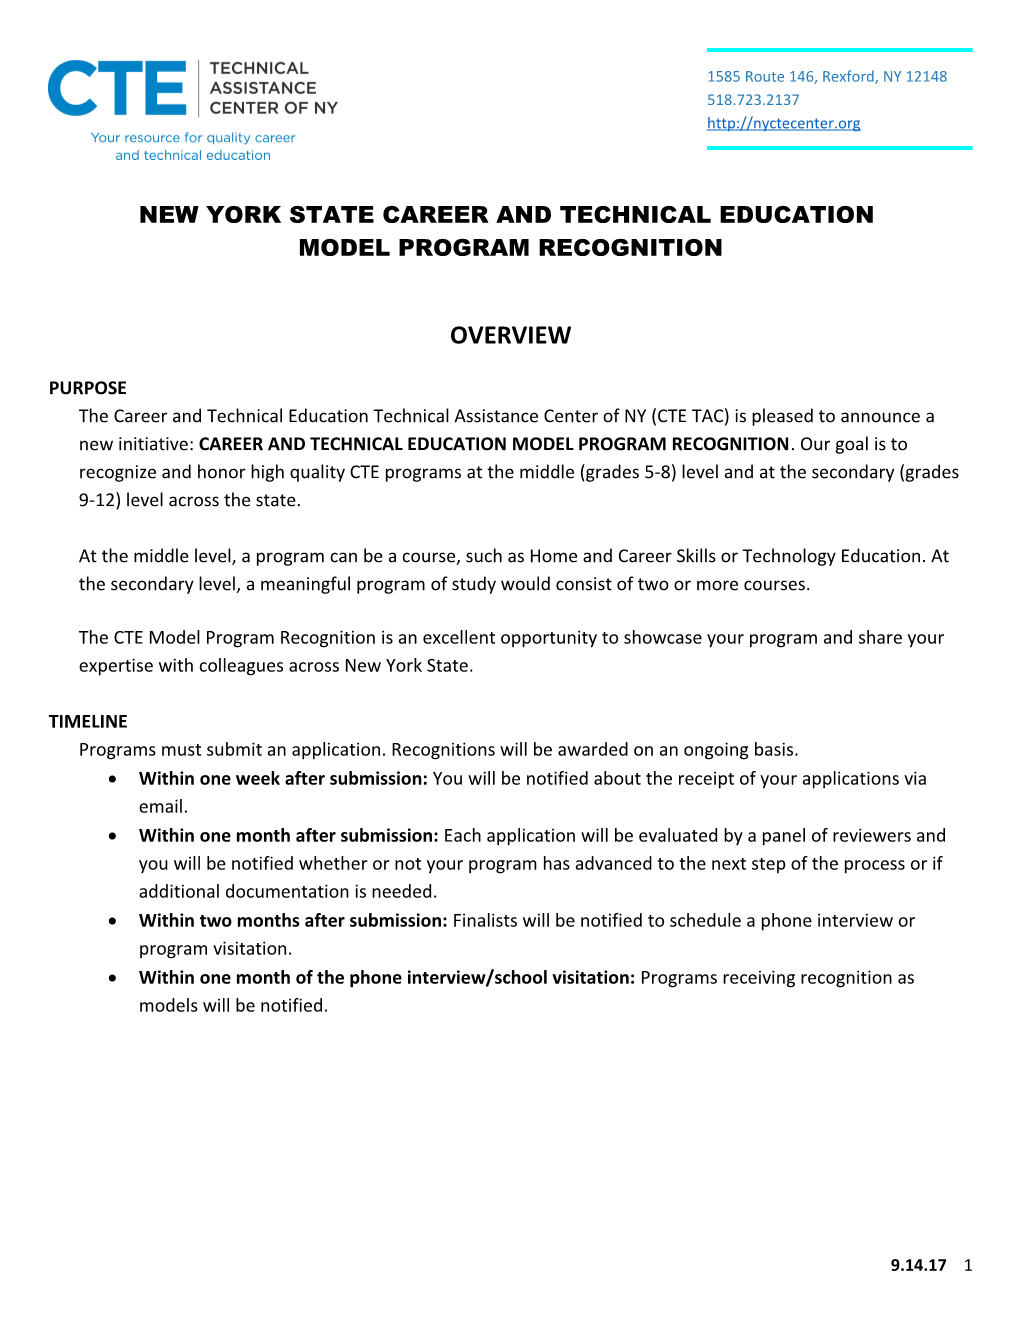 New York State Career and Technical Education